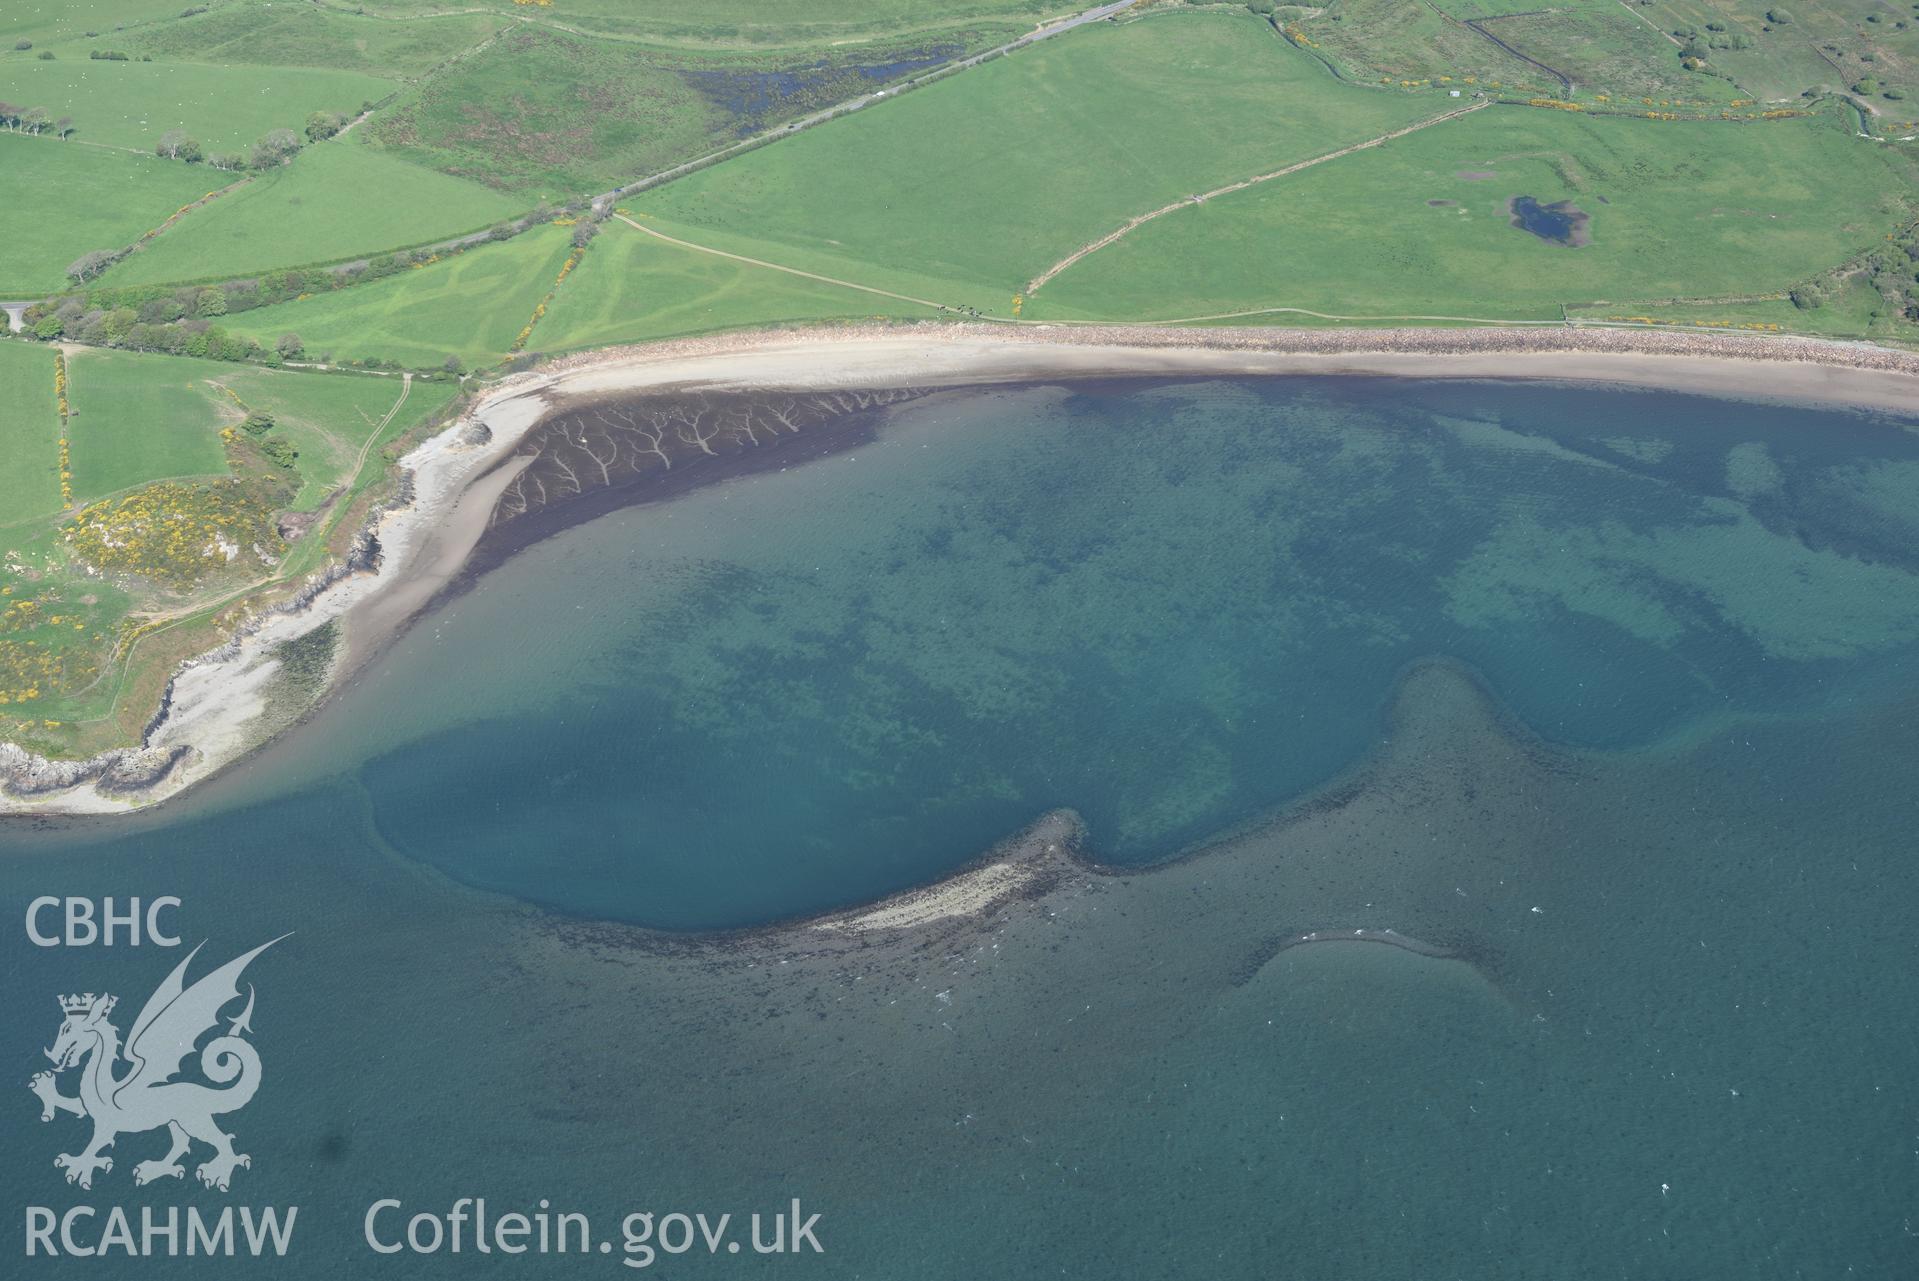 Aerial photography of Carreg y Defaid taken on 3rd May 2017.  Baseline aerial reconnaissance survey for the CHERISH Project. ? Crown: CHERISH PROJECT 2017. Produced with EU funds through the Ireland Wales Co-operation Programme 2014-2020. All material made freely available through the Open Government Licence.